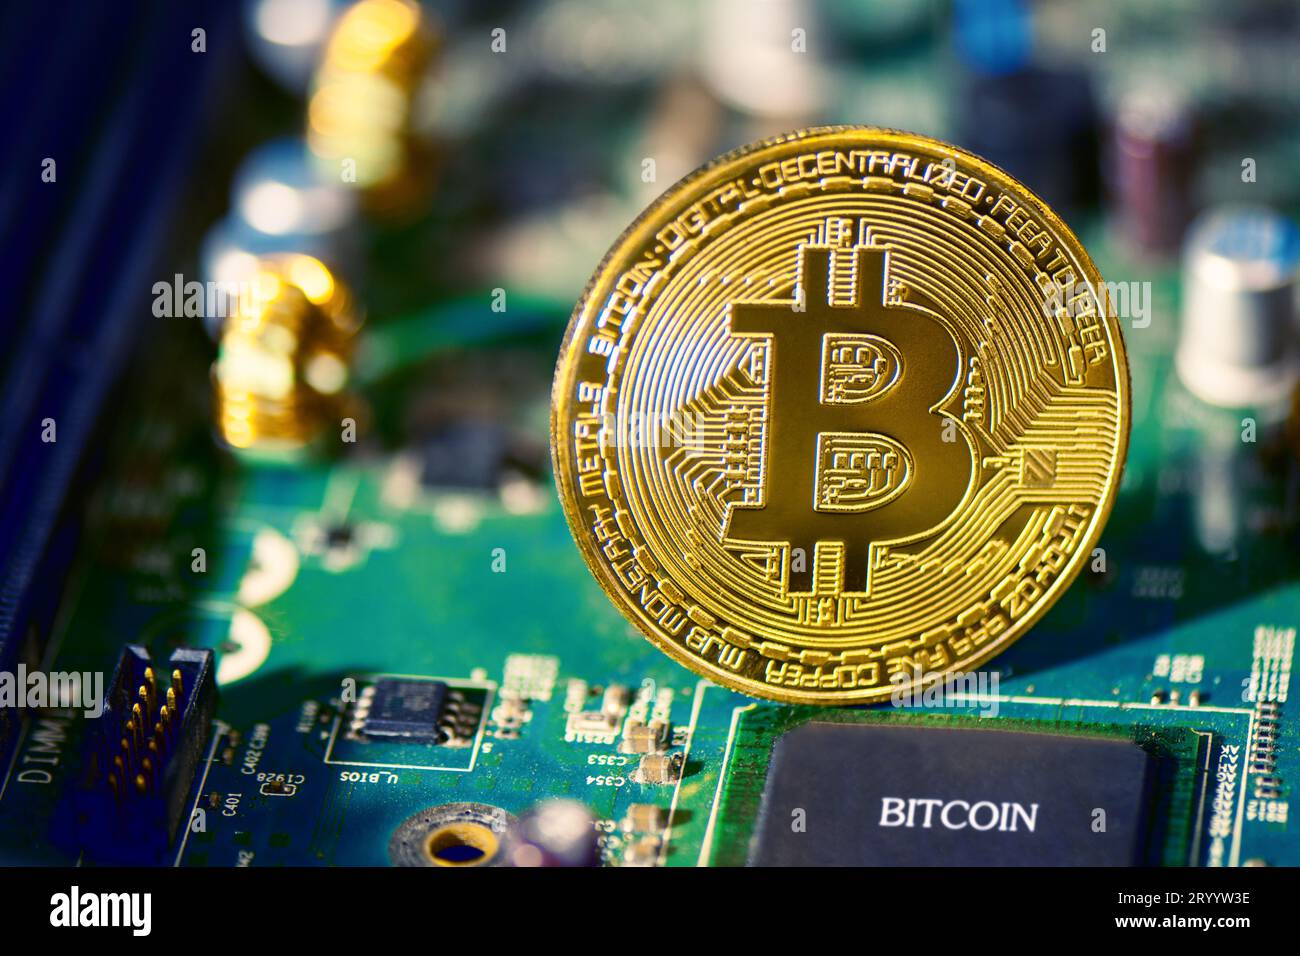 Bitcoin on electronic circuit board. Cryptography and Electronic money concept. Currency trading and Gold mining theme. Business Stock Photo